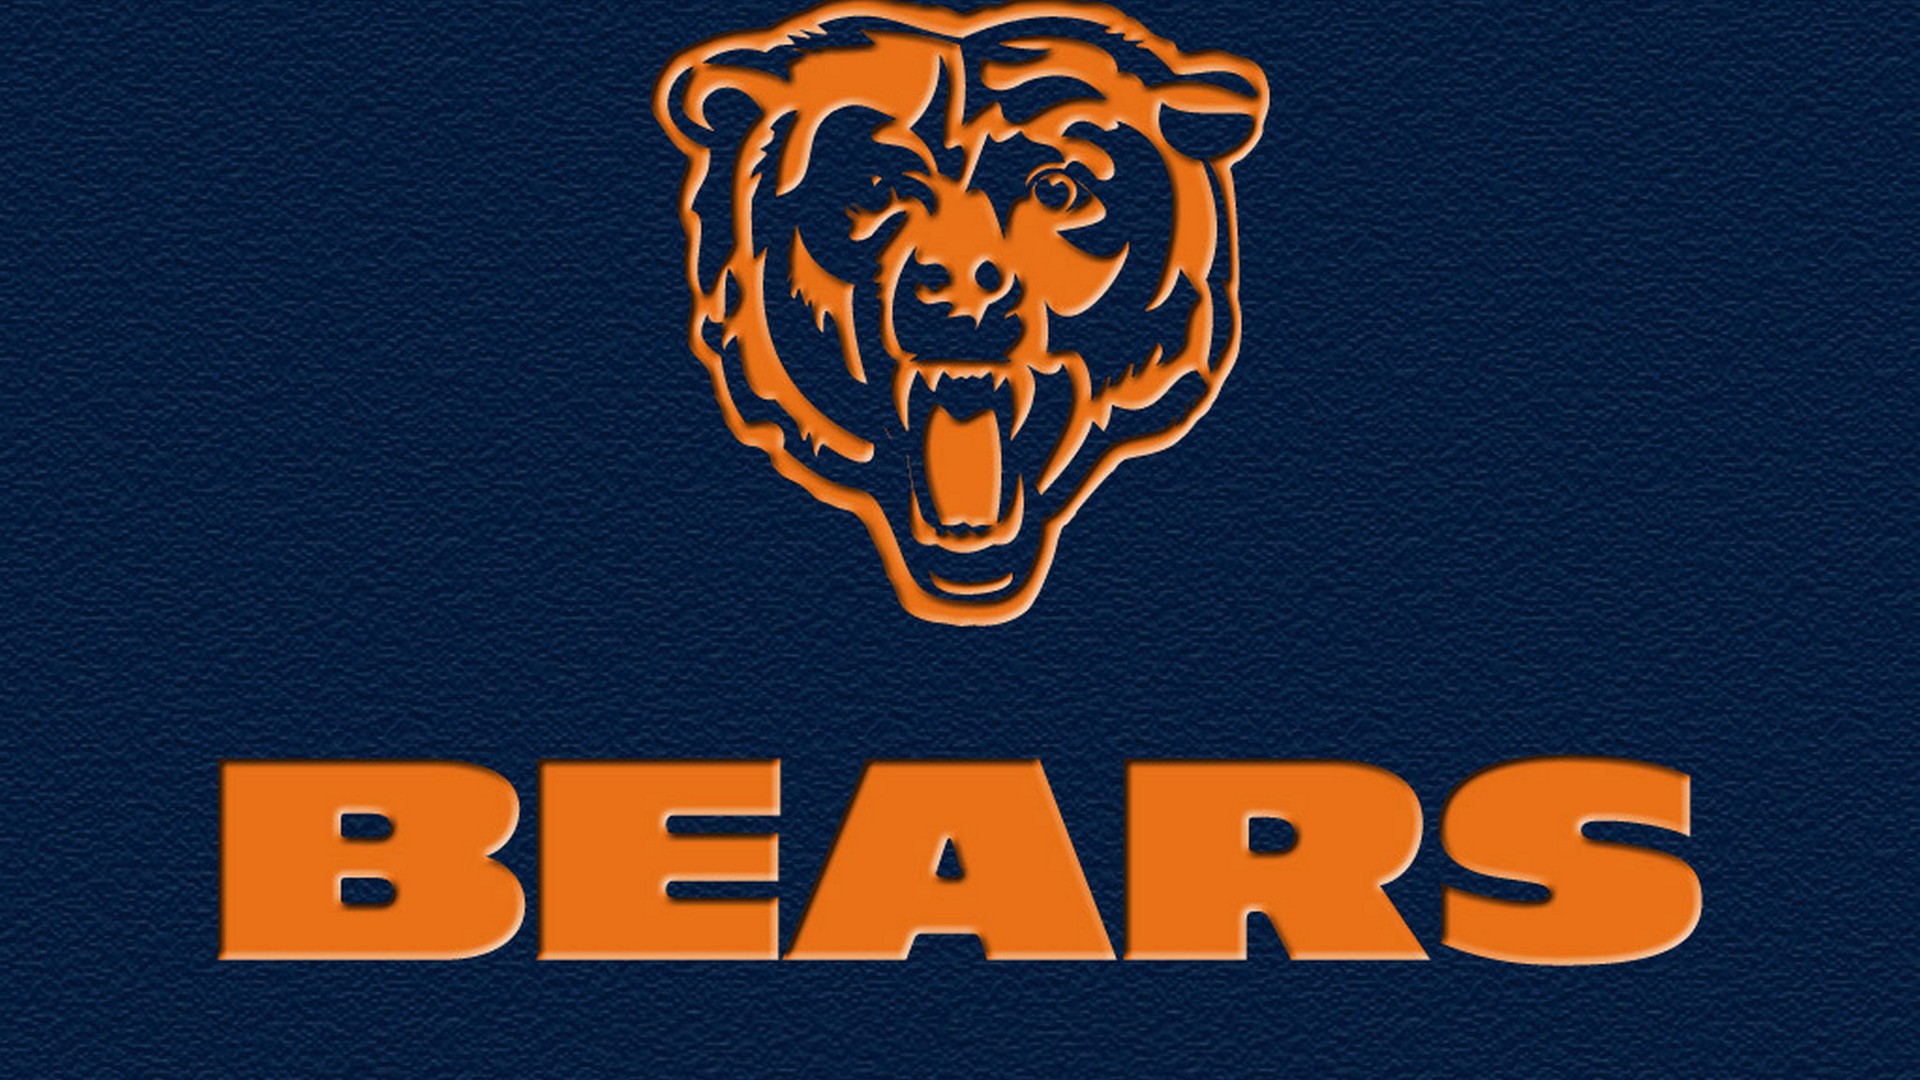 Chicago Bears For PC Wallpaper With Resolution 1920X1080